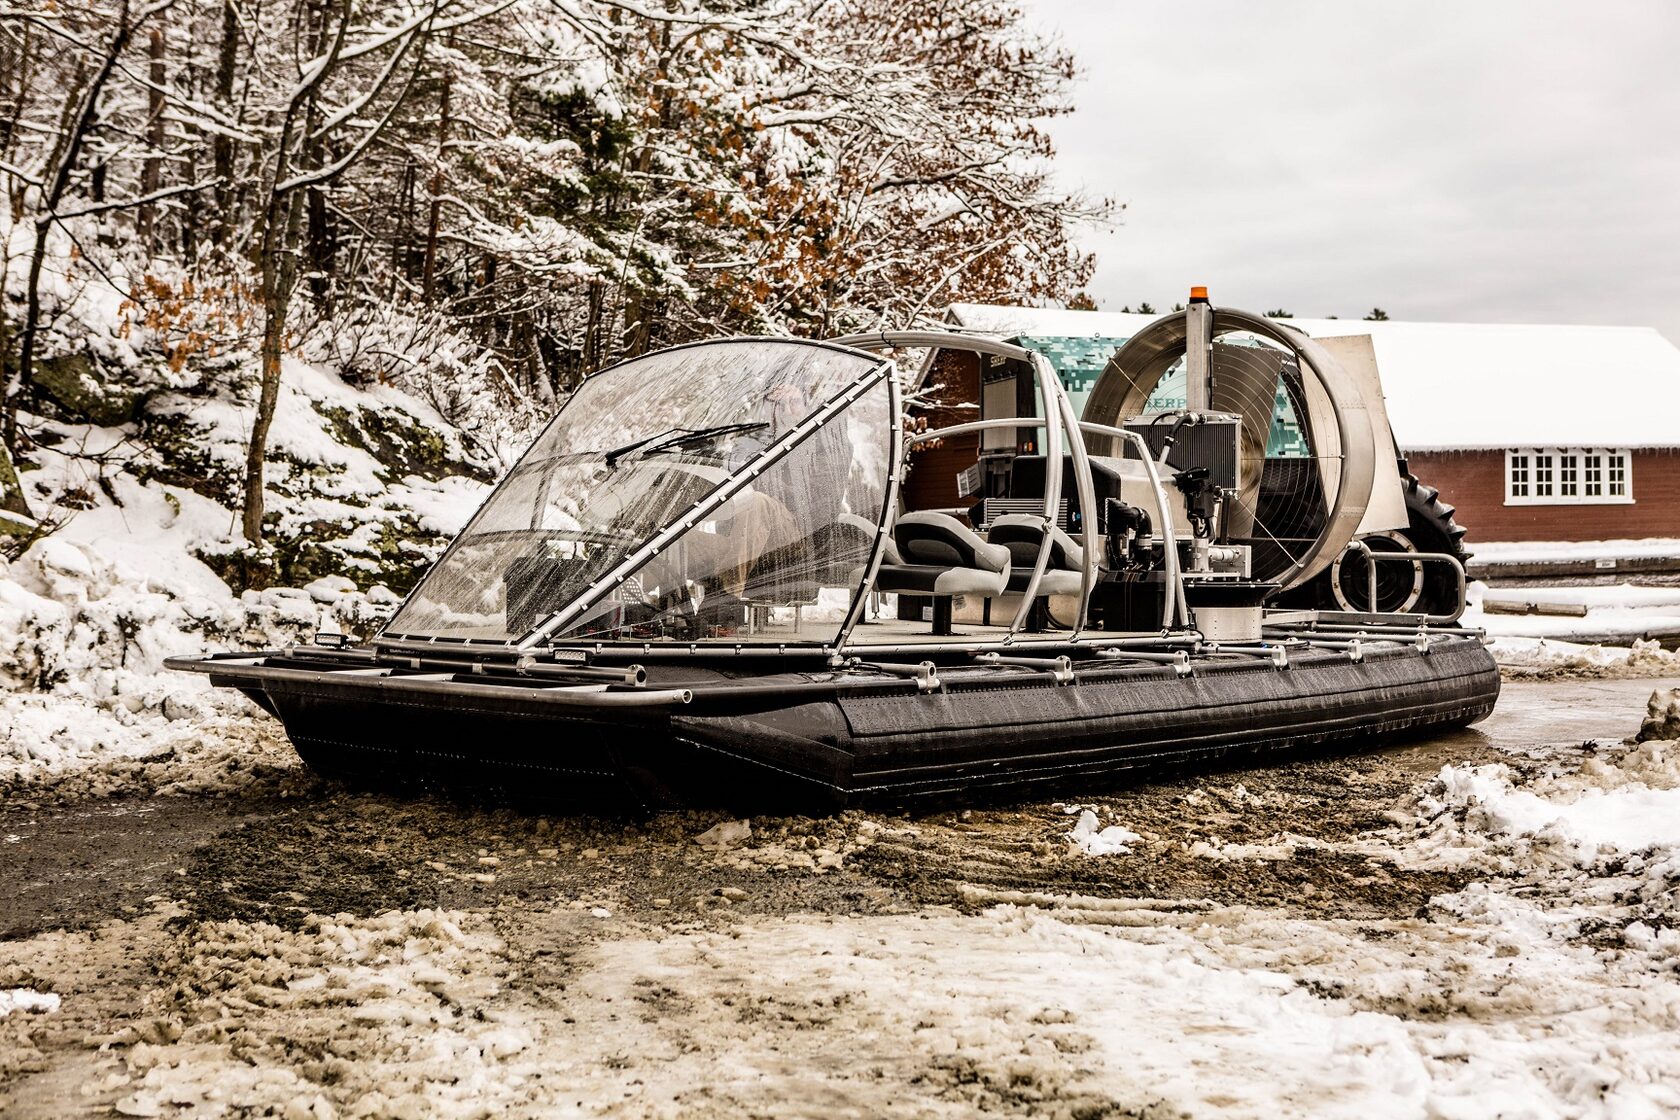 ATASD hovercraft airboat trials with SHERP ATV